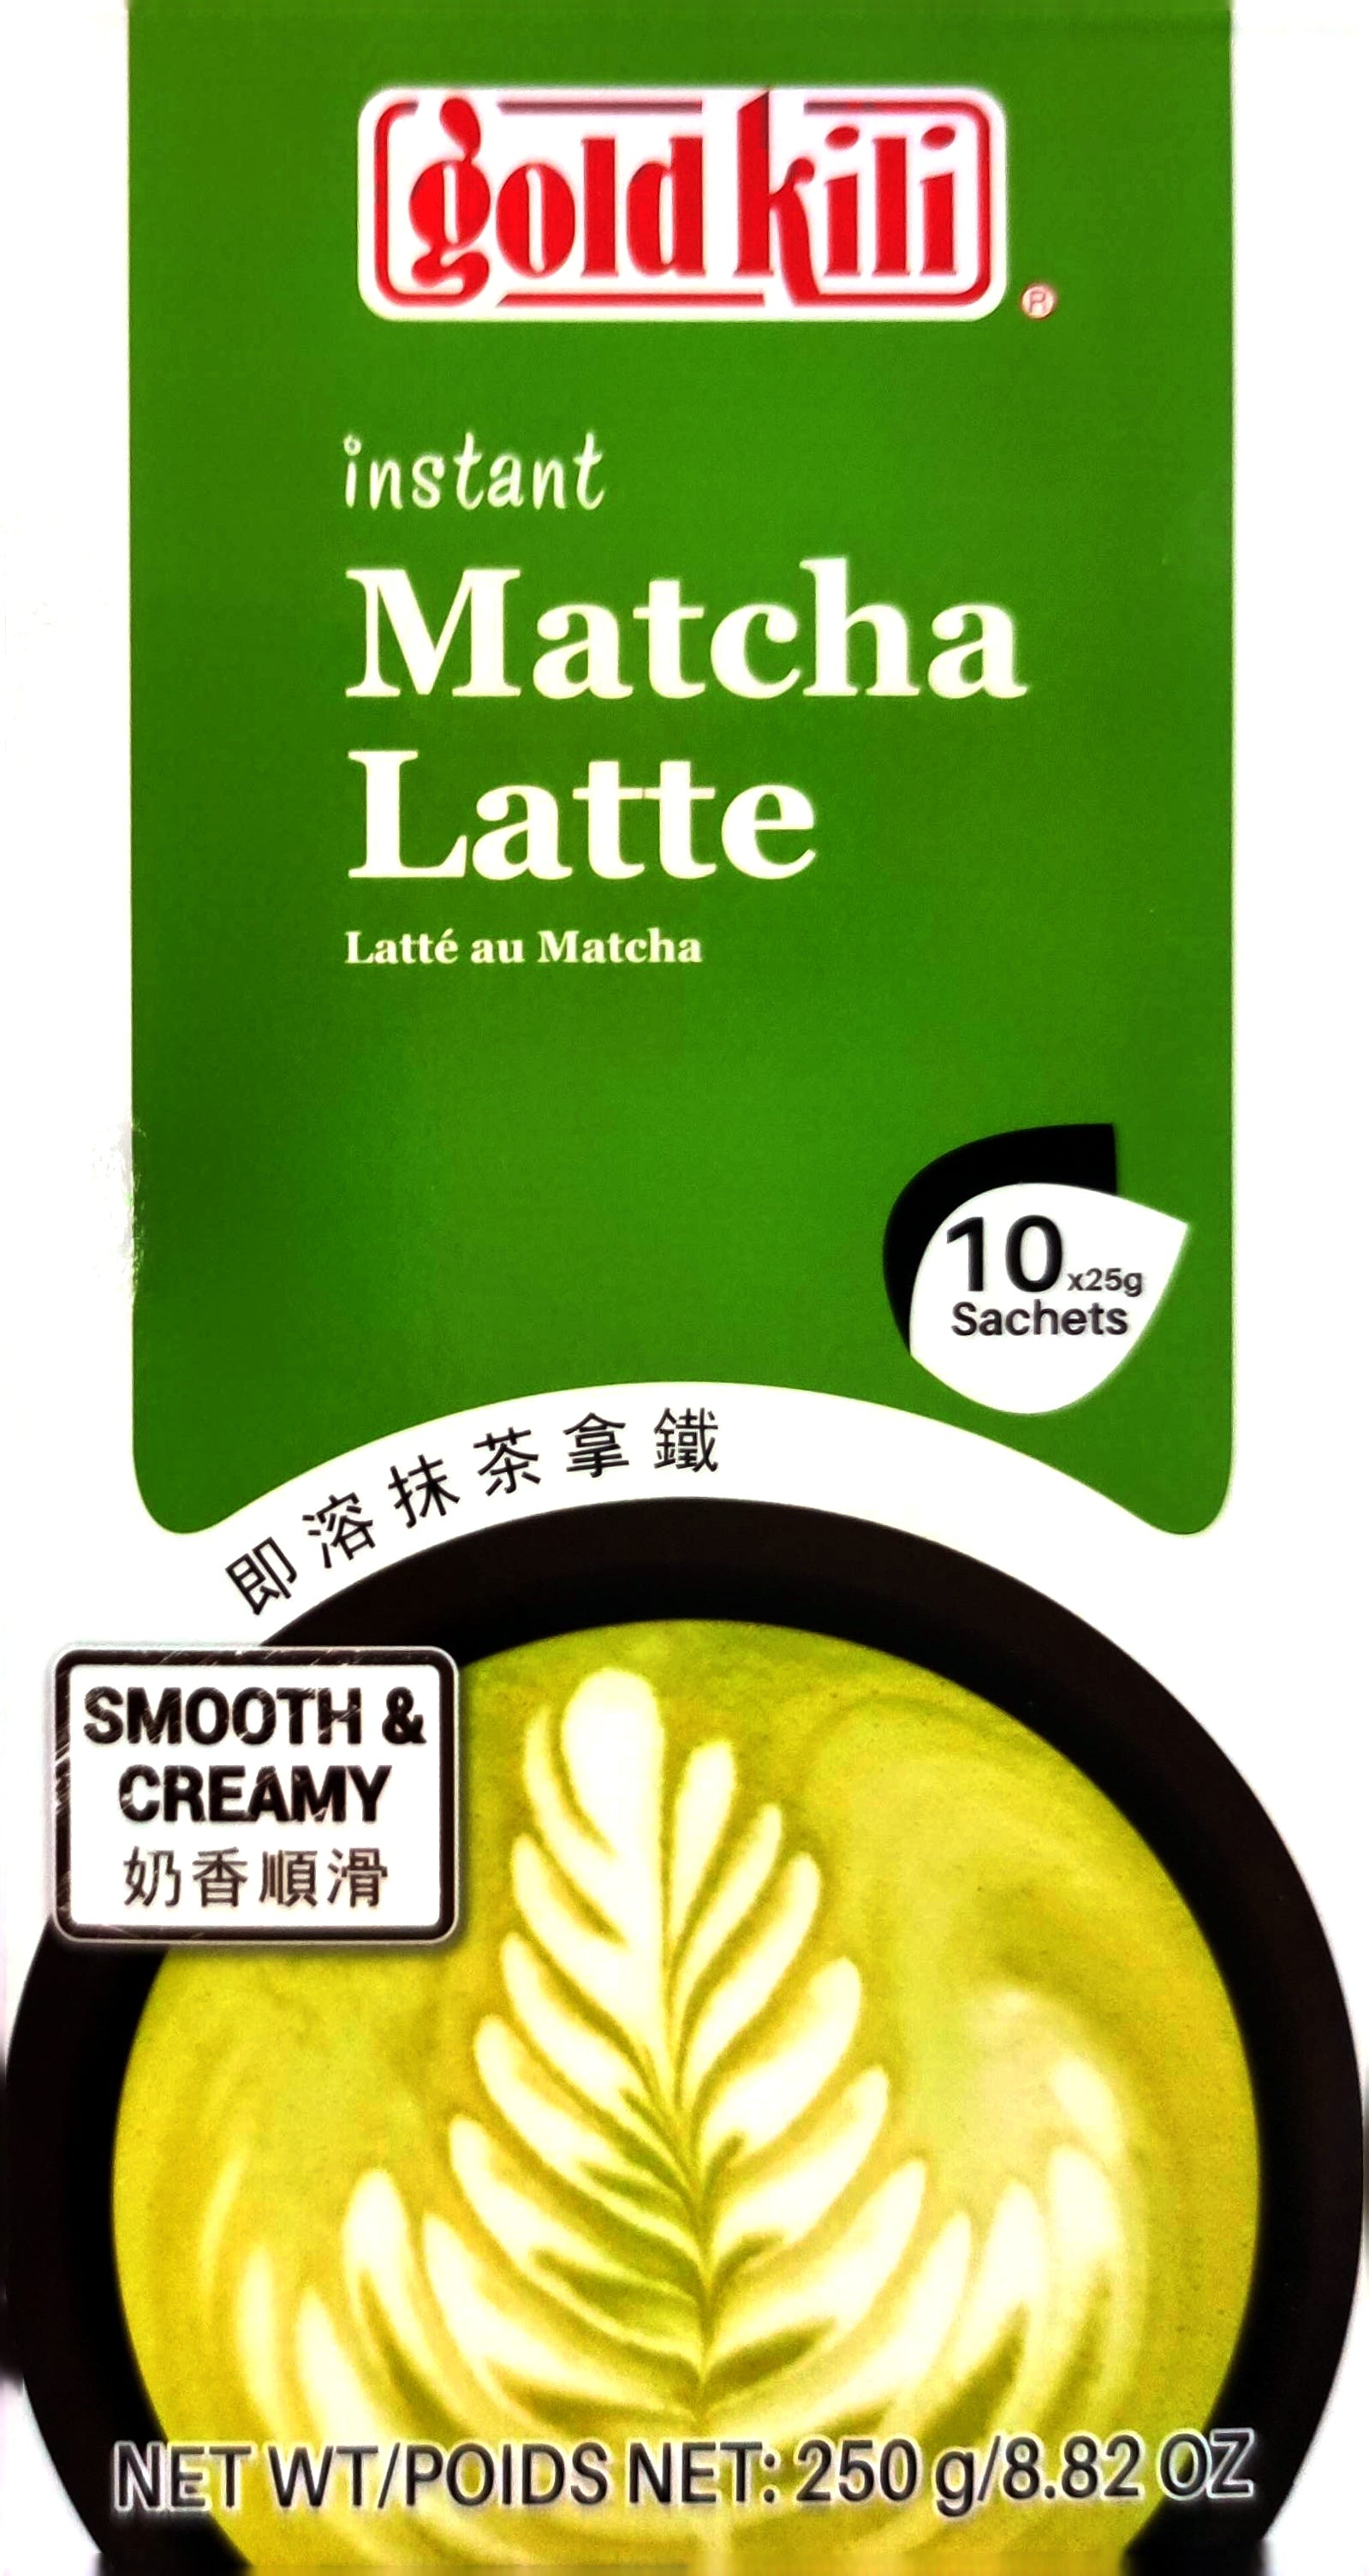 Latte solubile con matcha in bustine 10x25g – Pacific - Varese